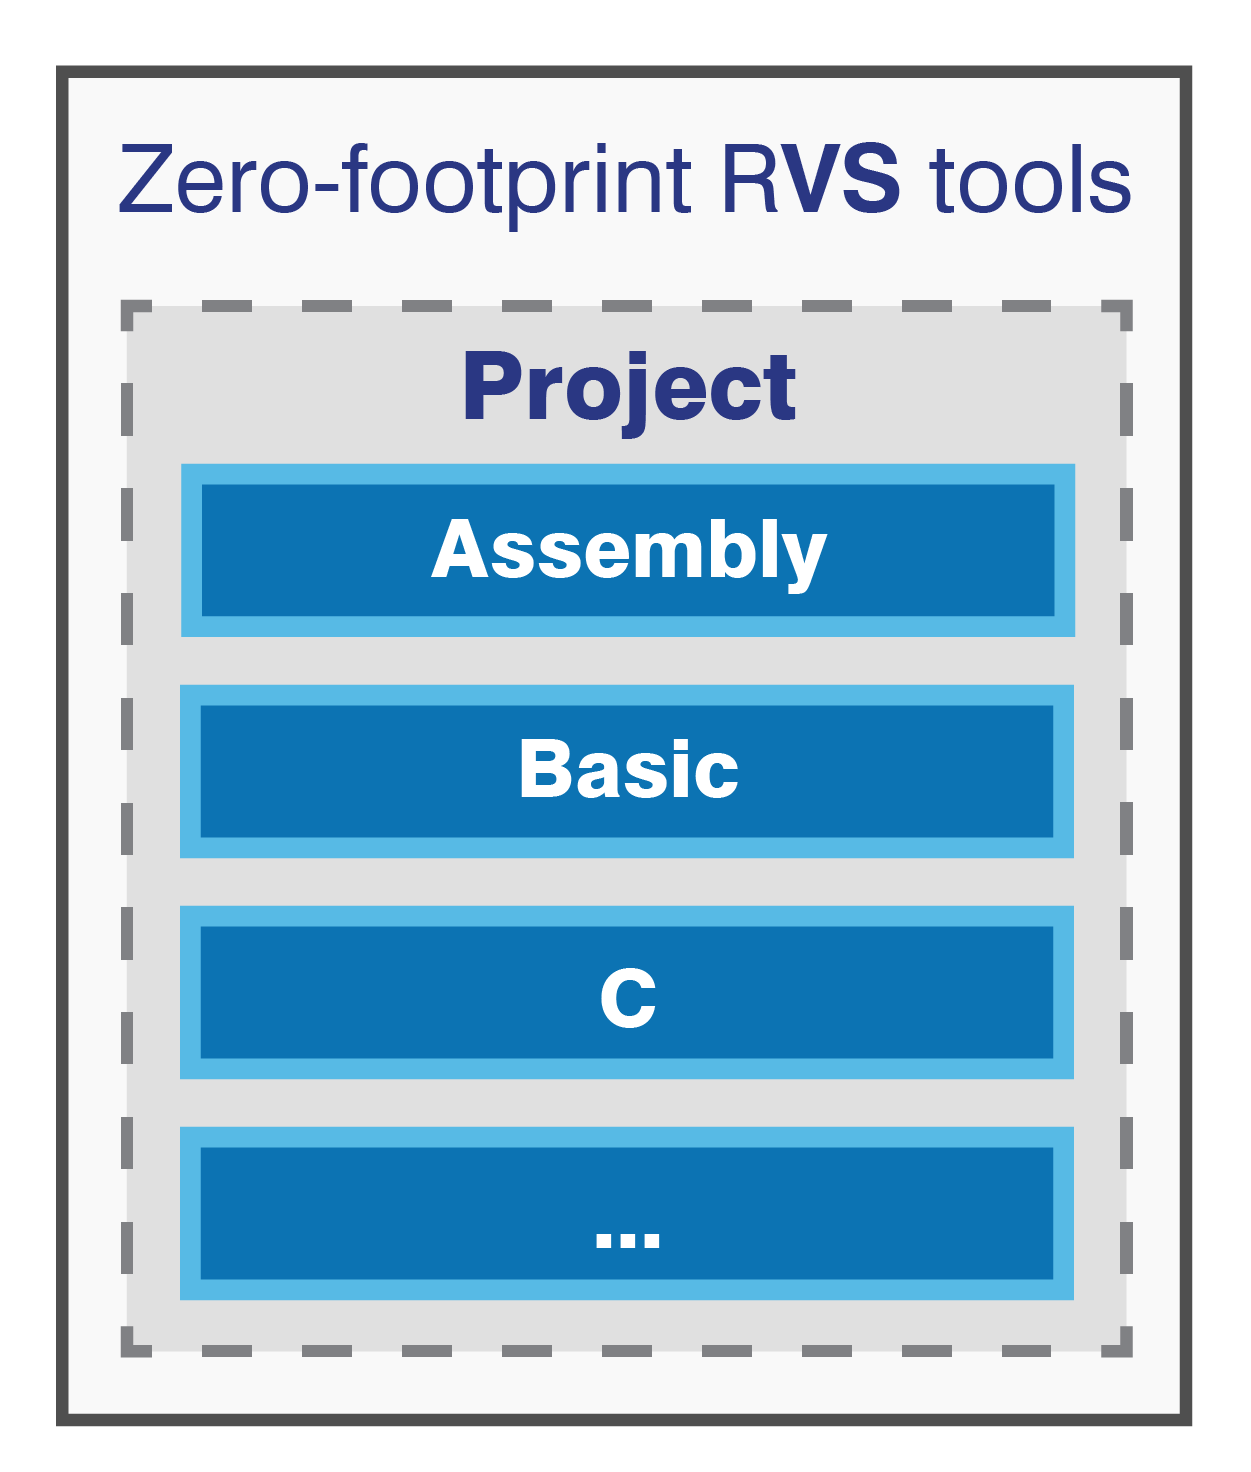 Mixed language support diagram for zero-footprint RVS software